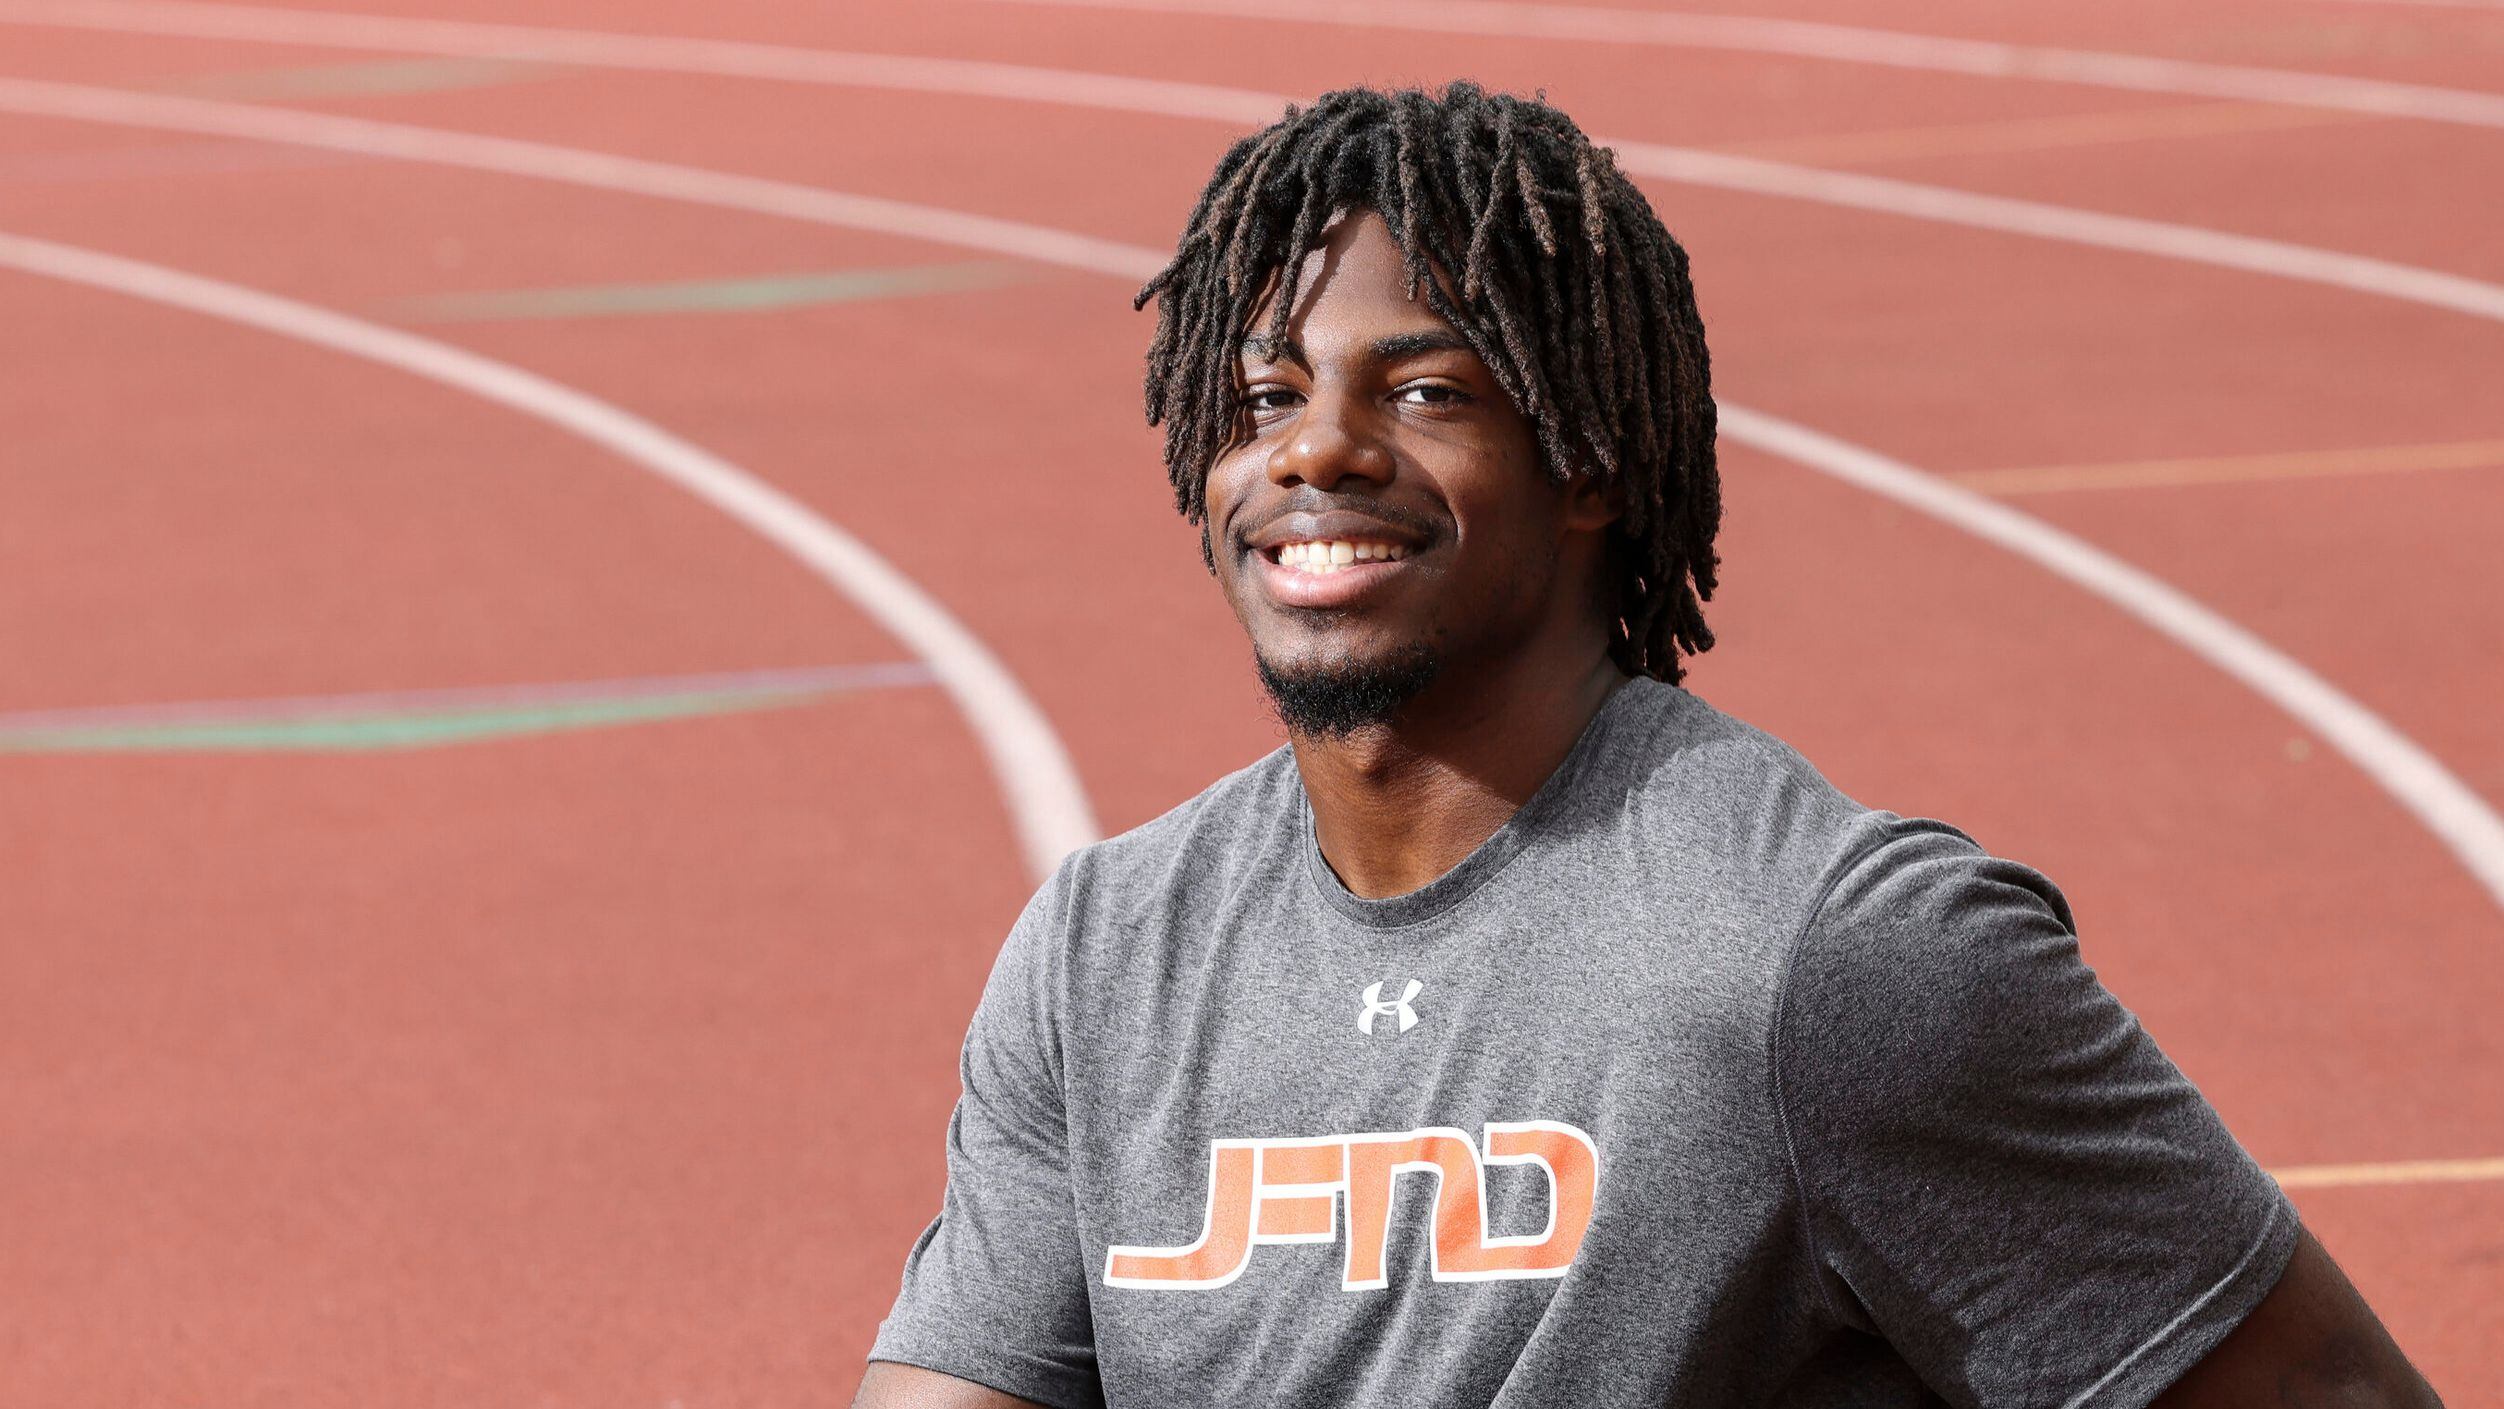 The Dallas Morning News' 2022 boys athlete of the year, all-area